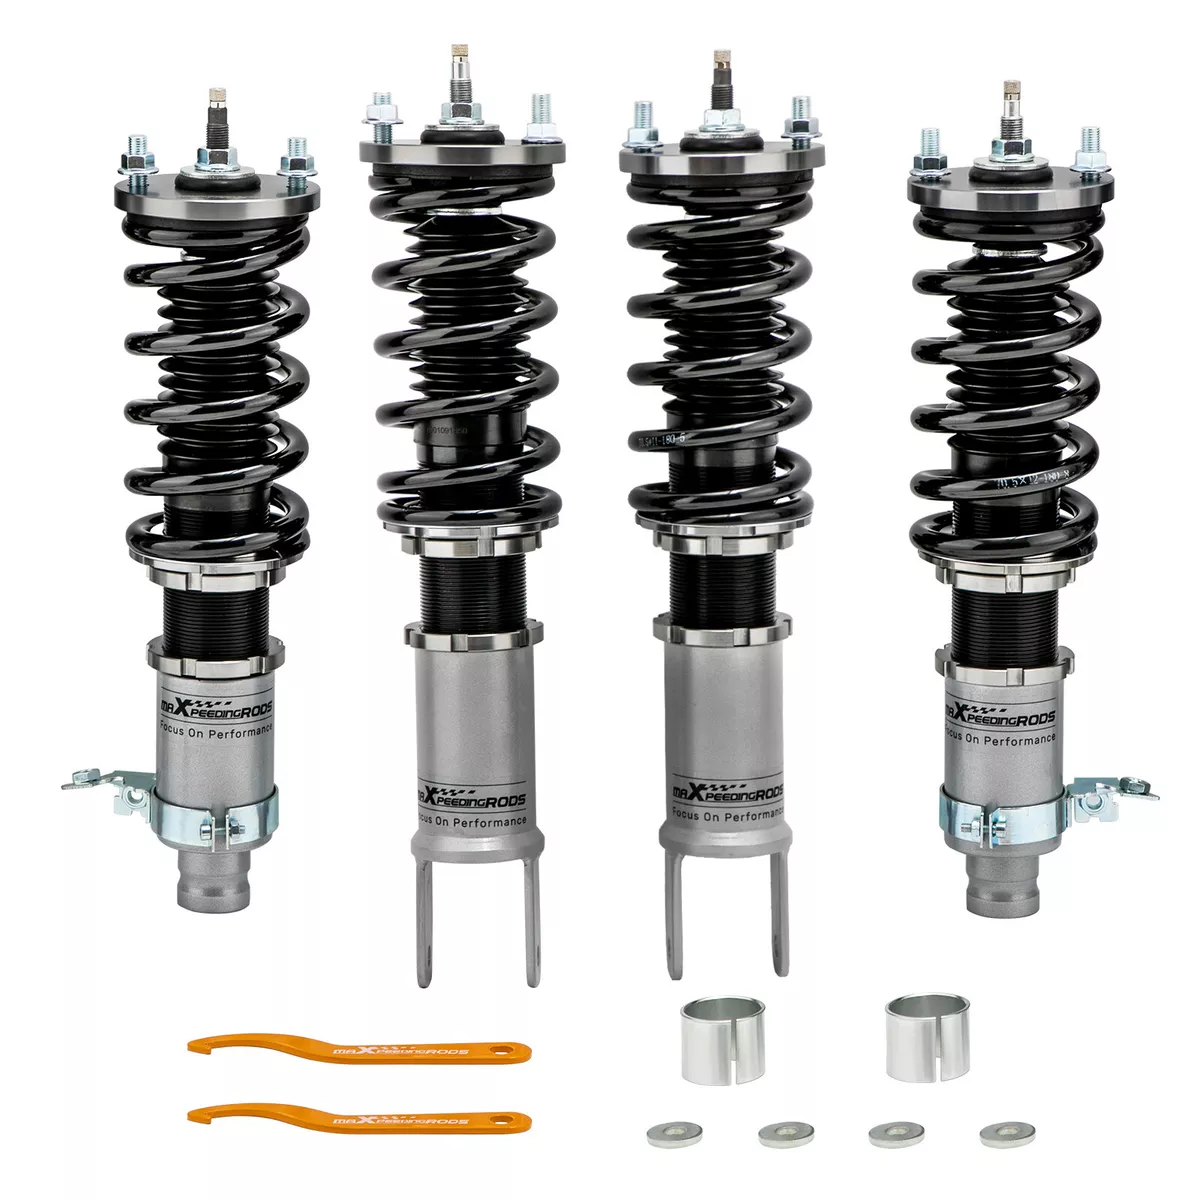 Maxpeedingrodsca-Performance Coilovers, and others Auto Parts For You